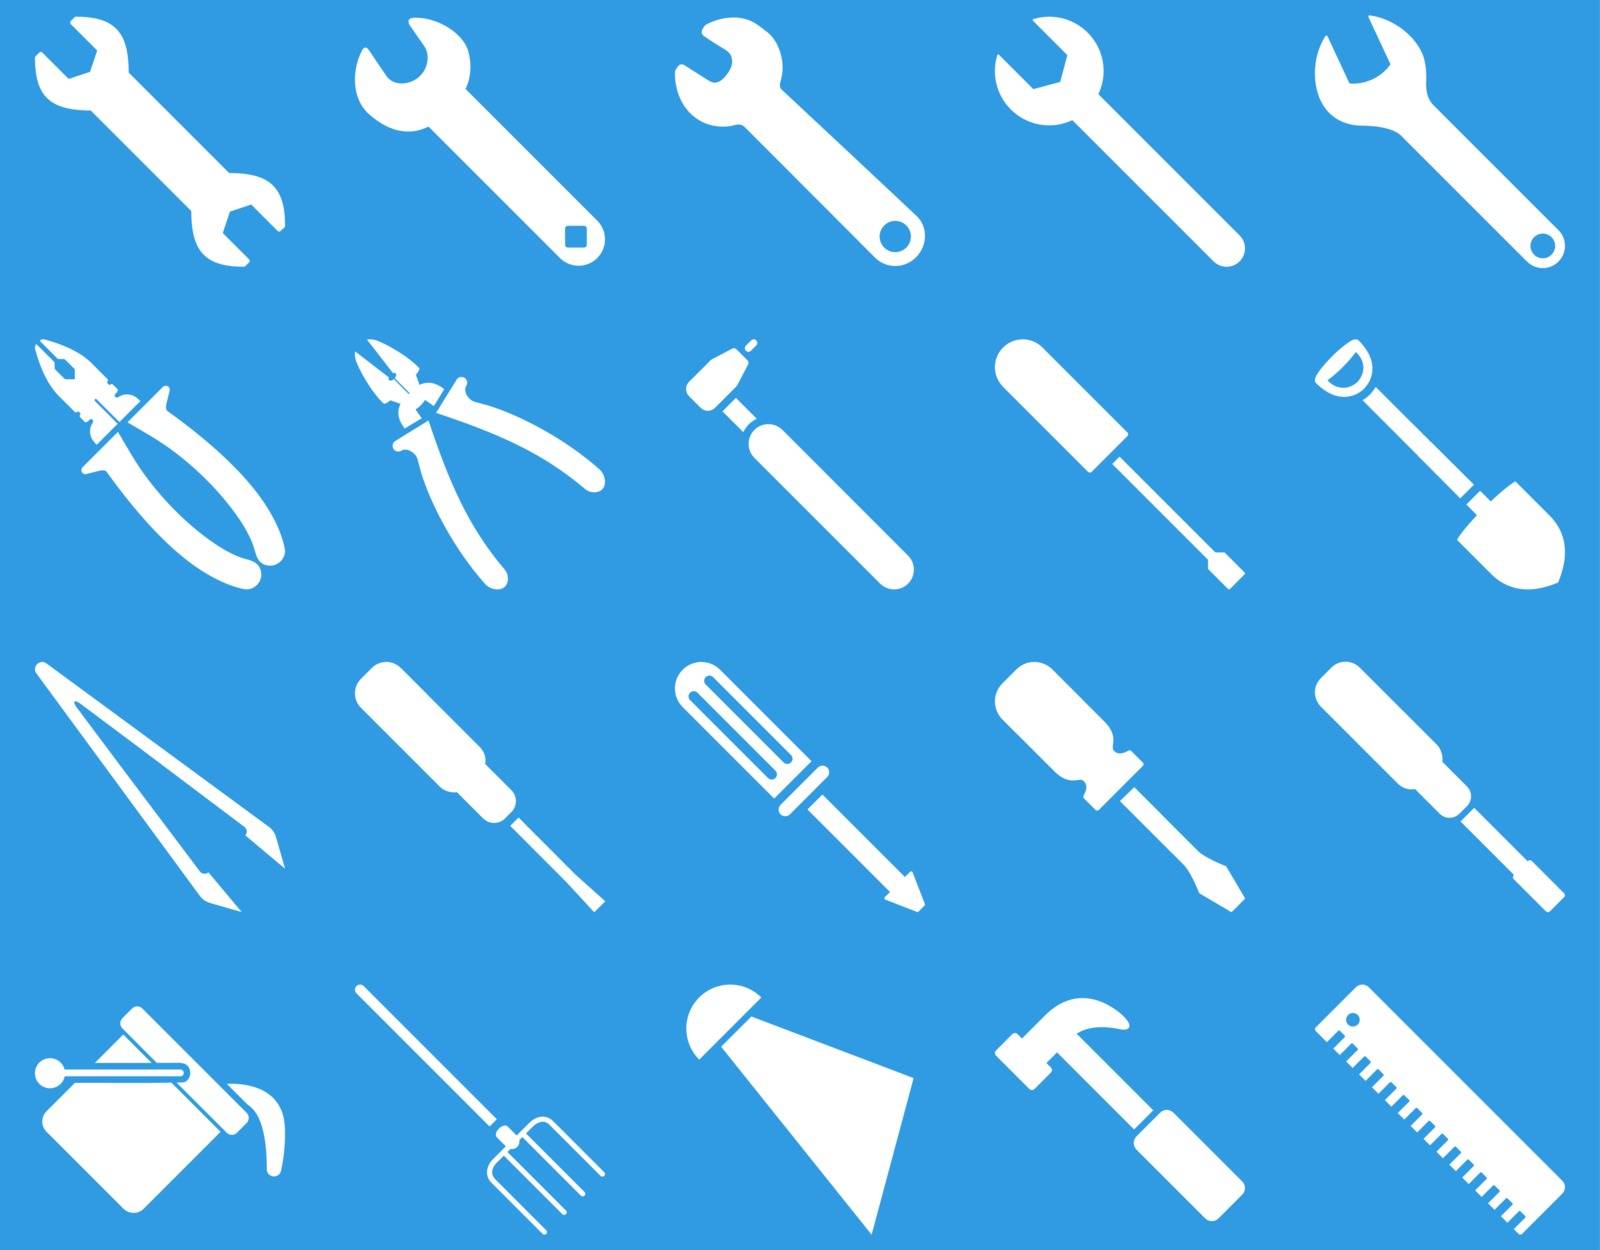 Equipment and Tools Icons. Vector set style is flat images, white color, isolated on a blue background.